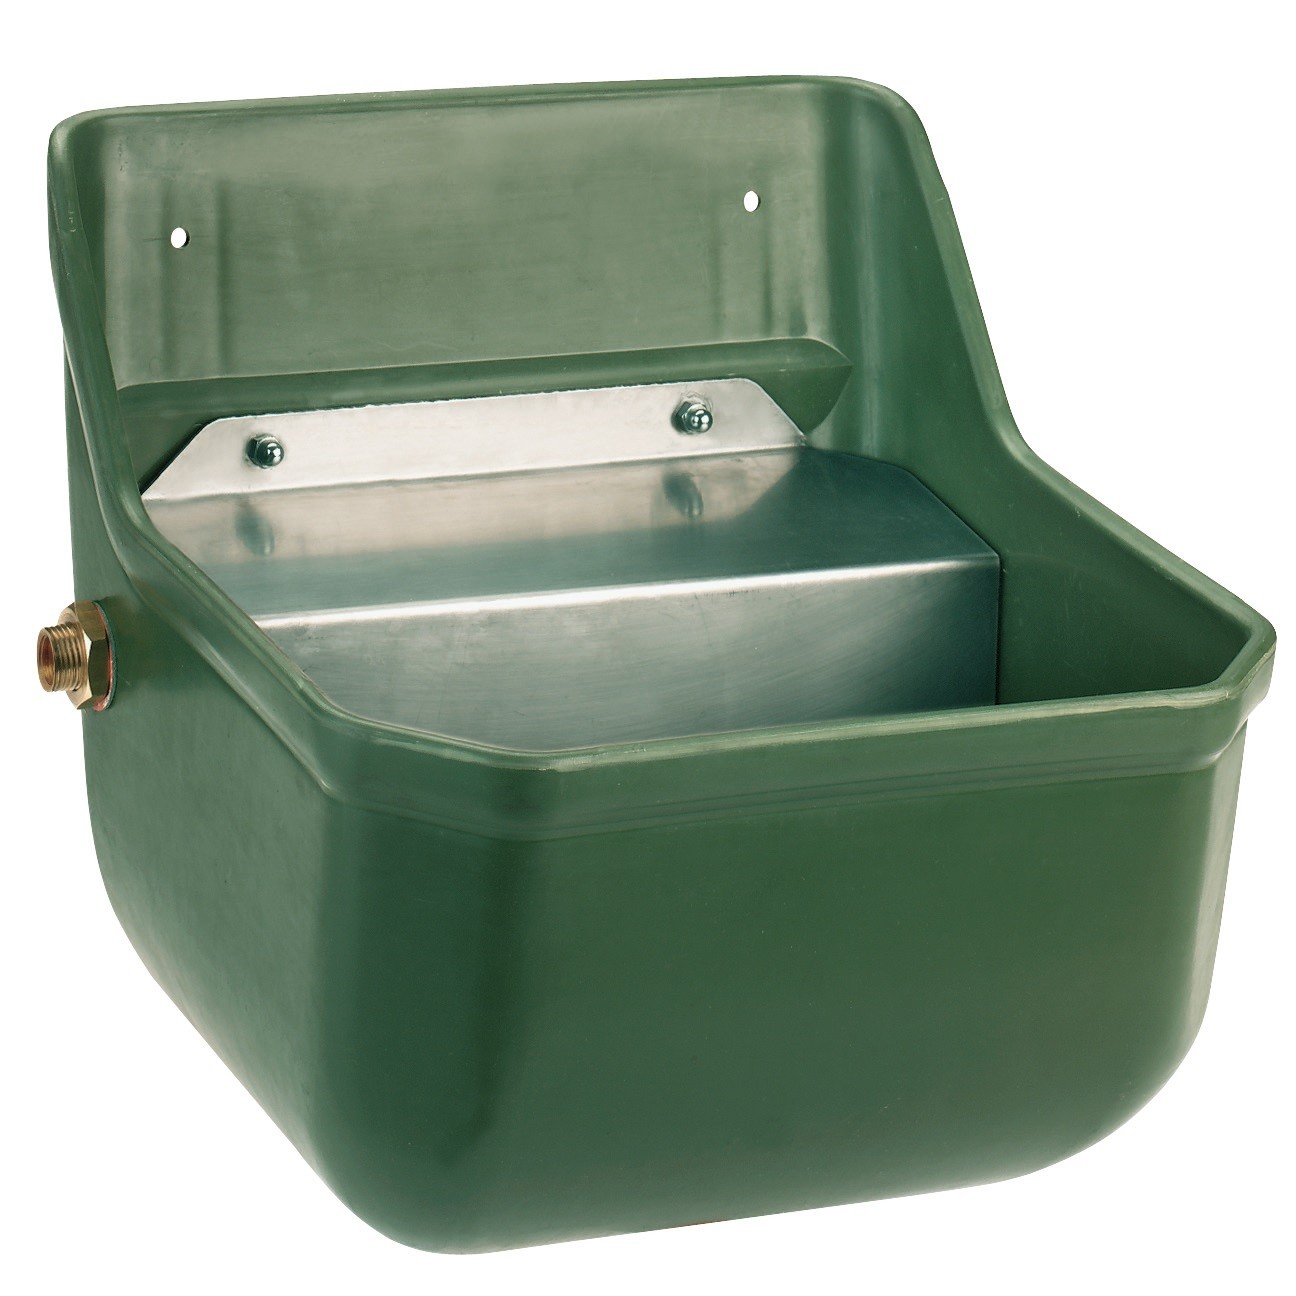 Water trough with float valve